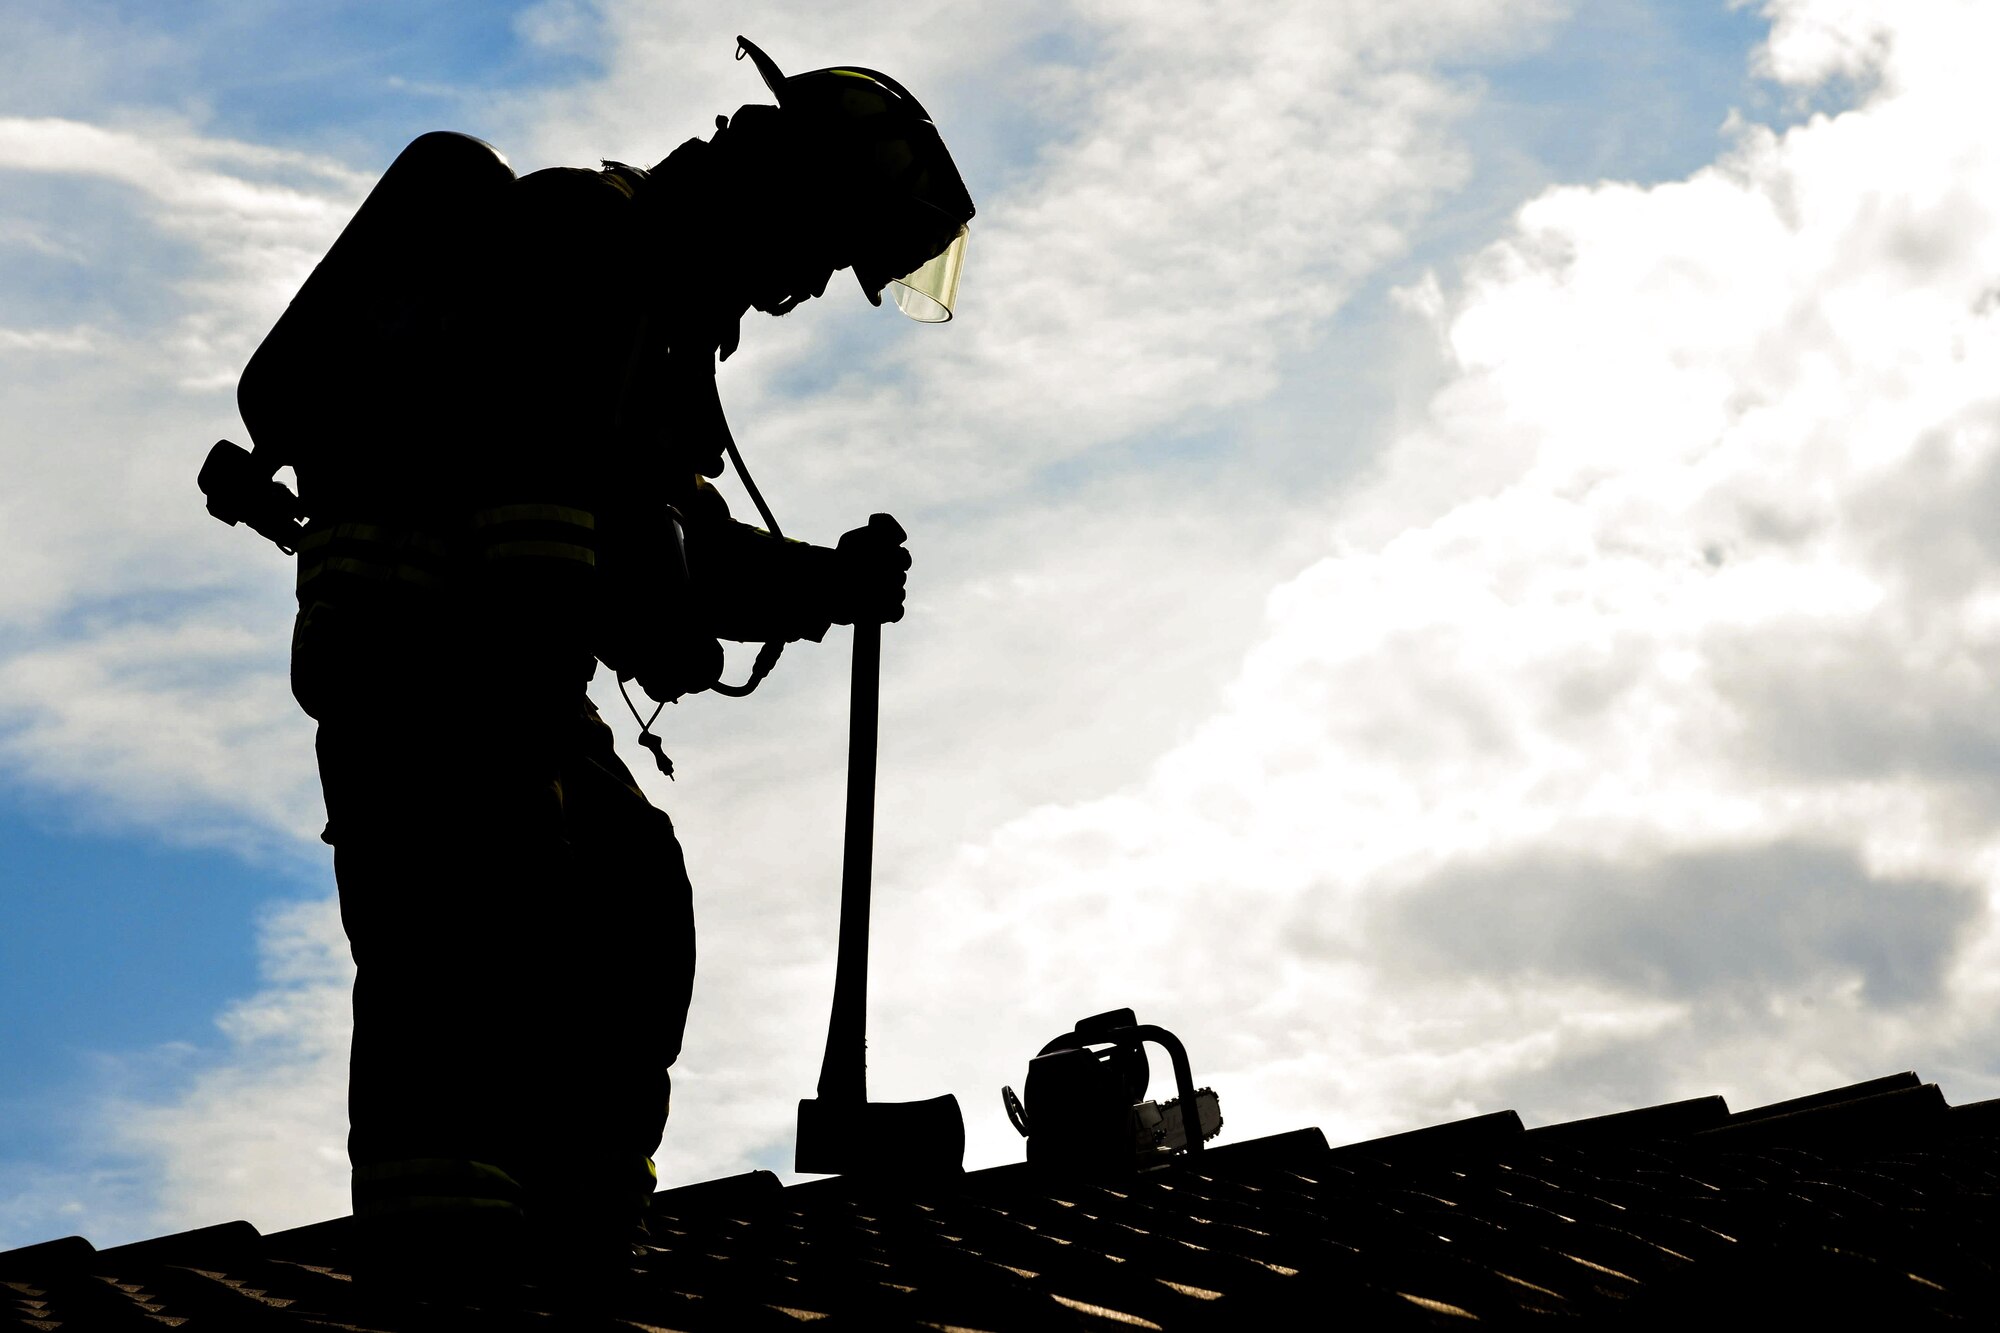 Airman 1st Class Adam Striejewski, 99th Civil Engineer Squadron firefighter, checks the roof of a simulated house fire during Red Flag 17-3 at Nellis Air Force Base, Nev., July 18, 2017. The increase of the base population during Red Flag exercises results in increased emergency calls to the fire department for anything from a minor medical emergency to a major flightline incident. (U.S. Air Force photo by Airman 1st Class Andrew D. Sarver/Released)